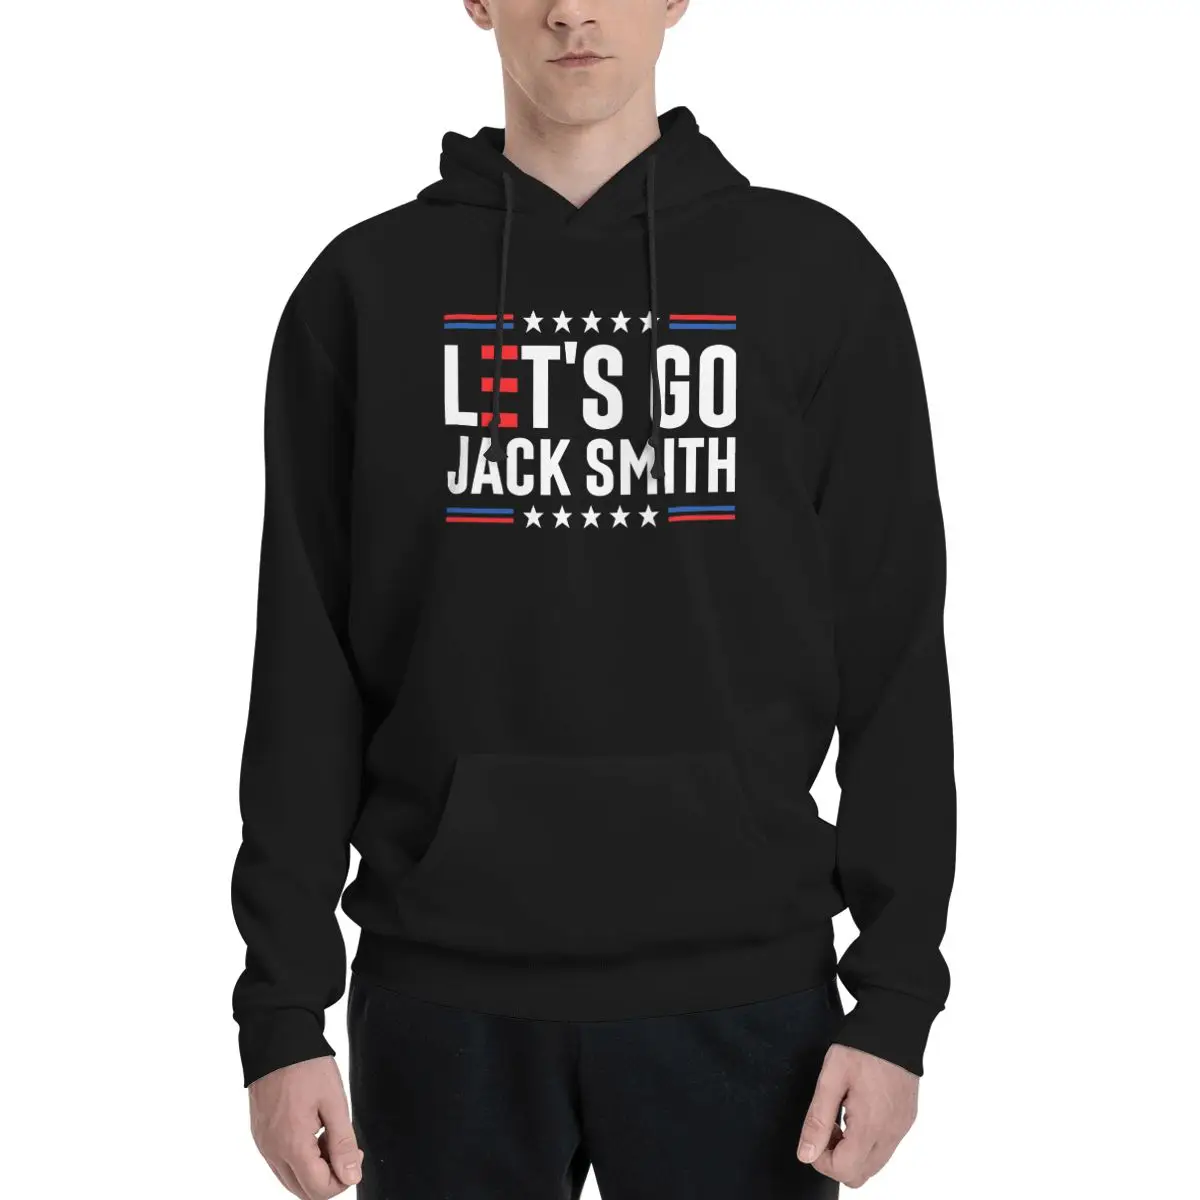 

Let'S Go Jack Smith Jack Smith Conservative Us Flag Polyester Hoodie Men's sweatershirt Warm Dif Colors Sizes